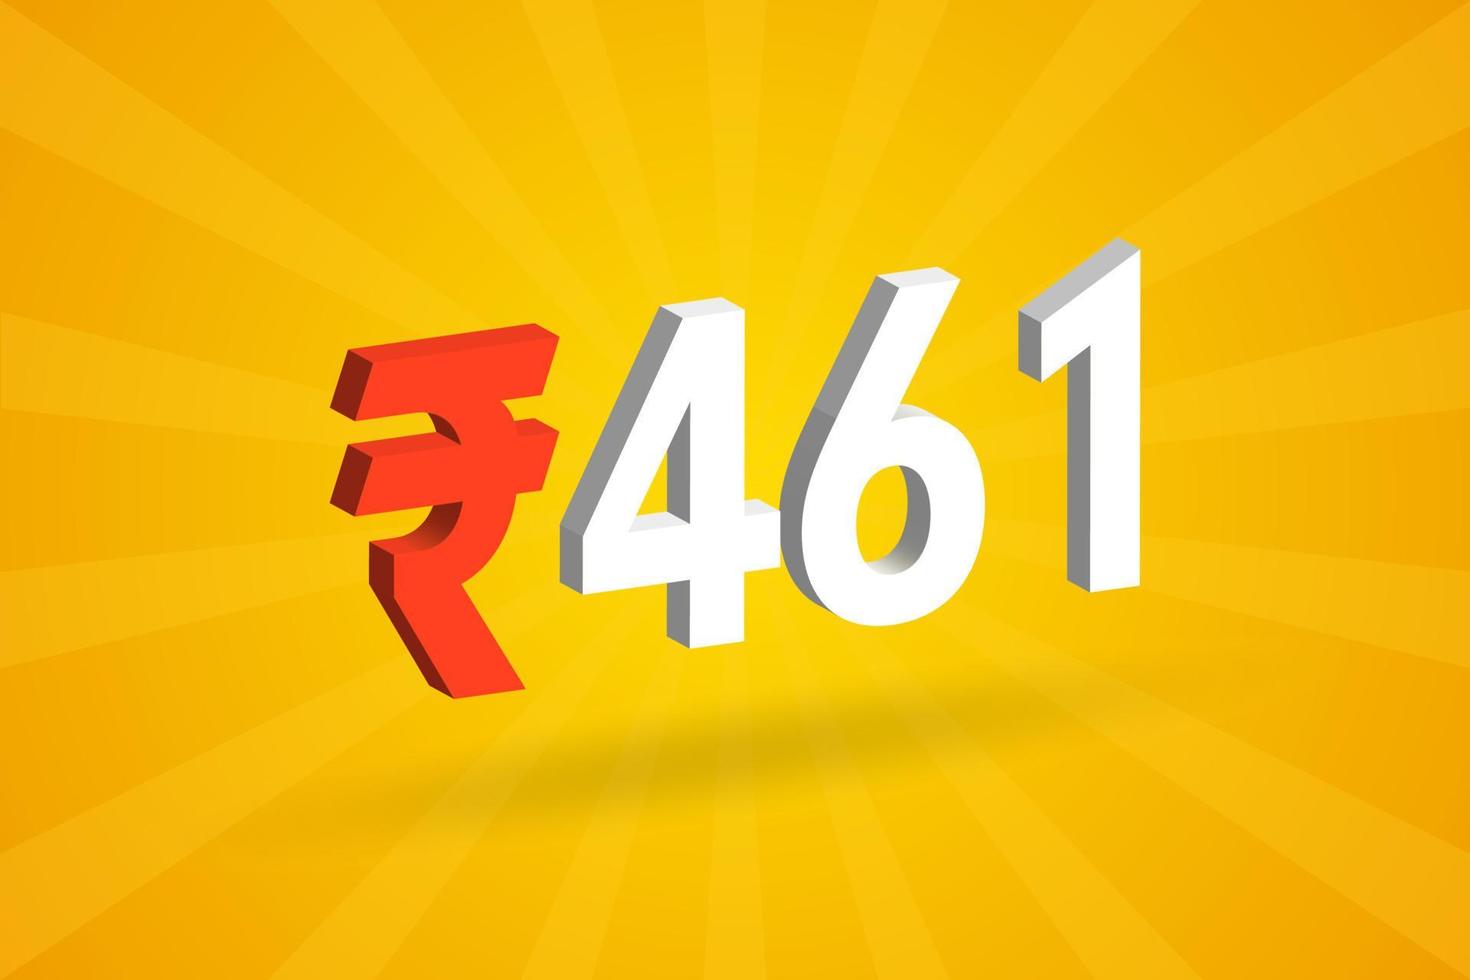 461 Rupee 3D symbol bold text vector image. 3D 461 Indian Rupee currency sign vector illustration